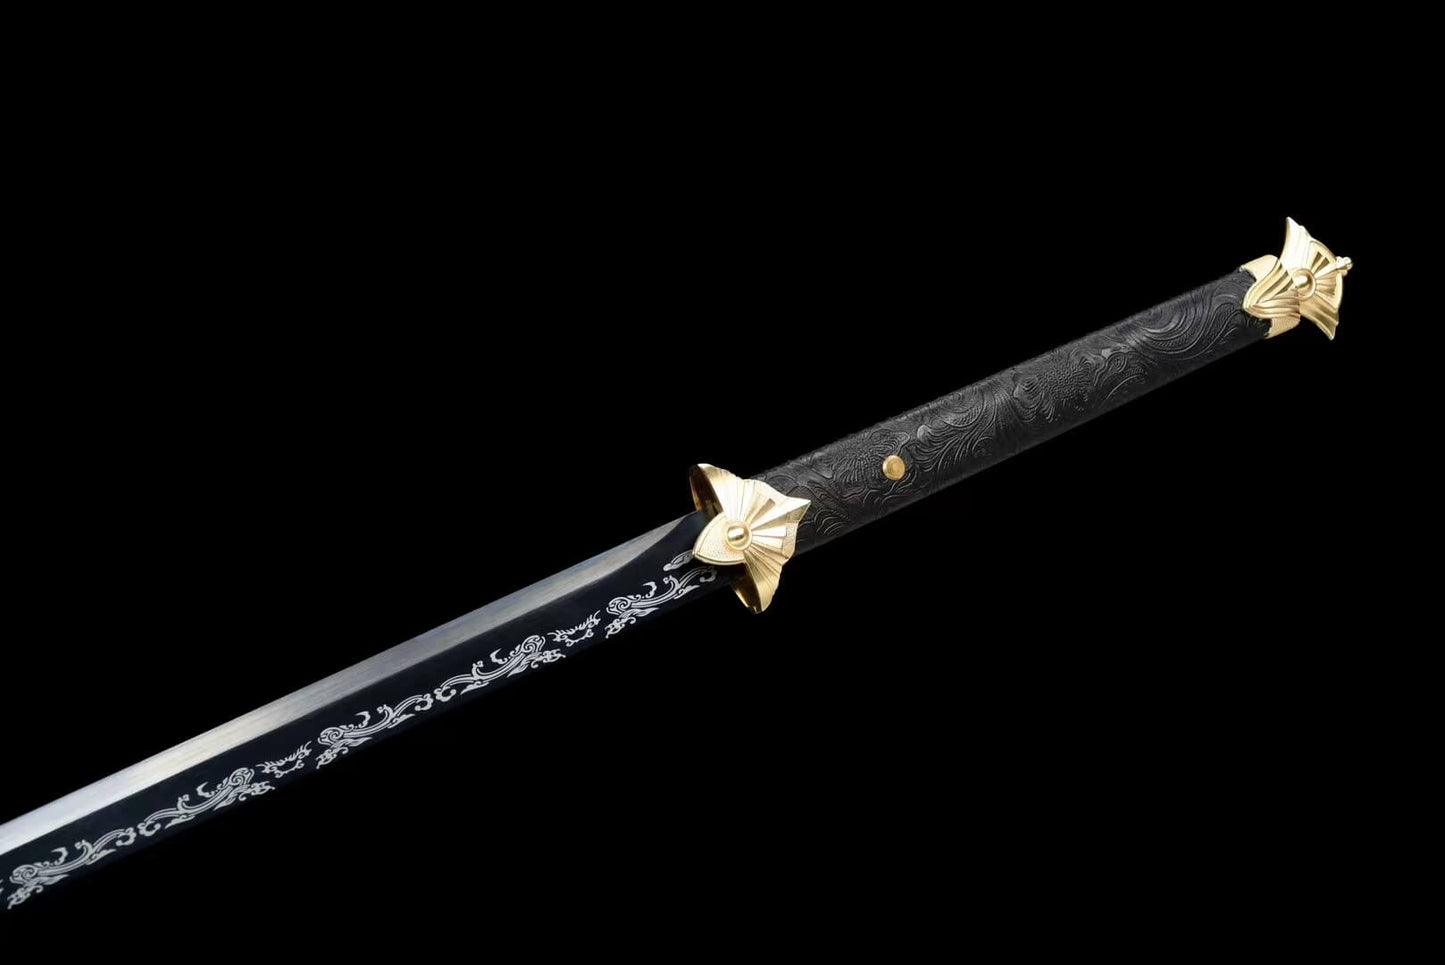 Tang dao sword,Forged High Carbon Steel Blade,Alloy Fittings,LOONGSWORD